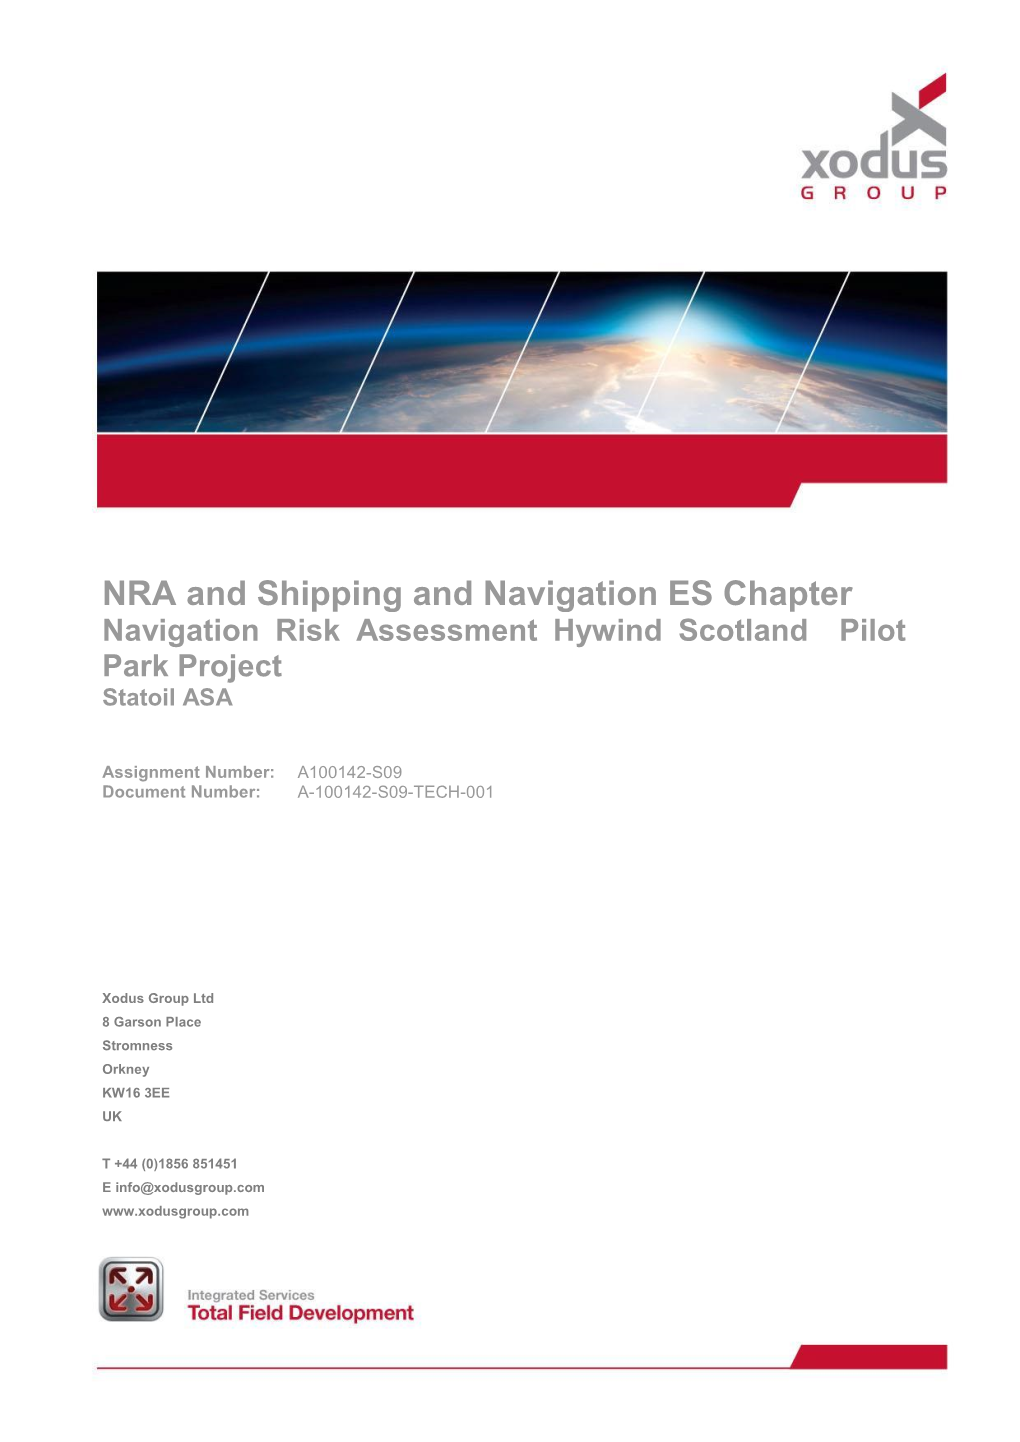 NRA and Shipping and Navigation ES Chapter Navigation Risk Assessment Hywind Scotland Pilot Park Project Statoil ASA